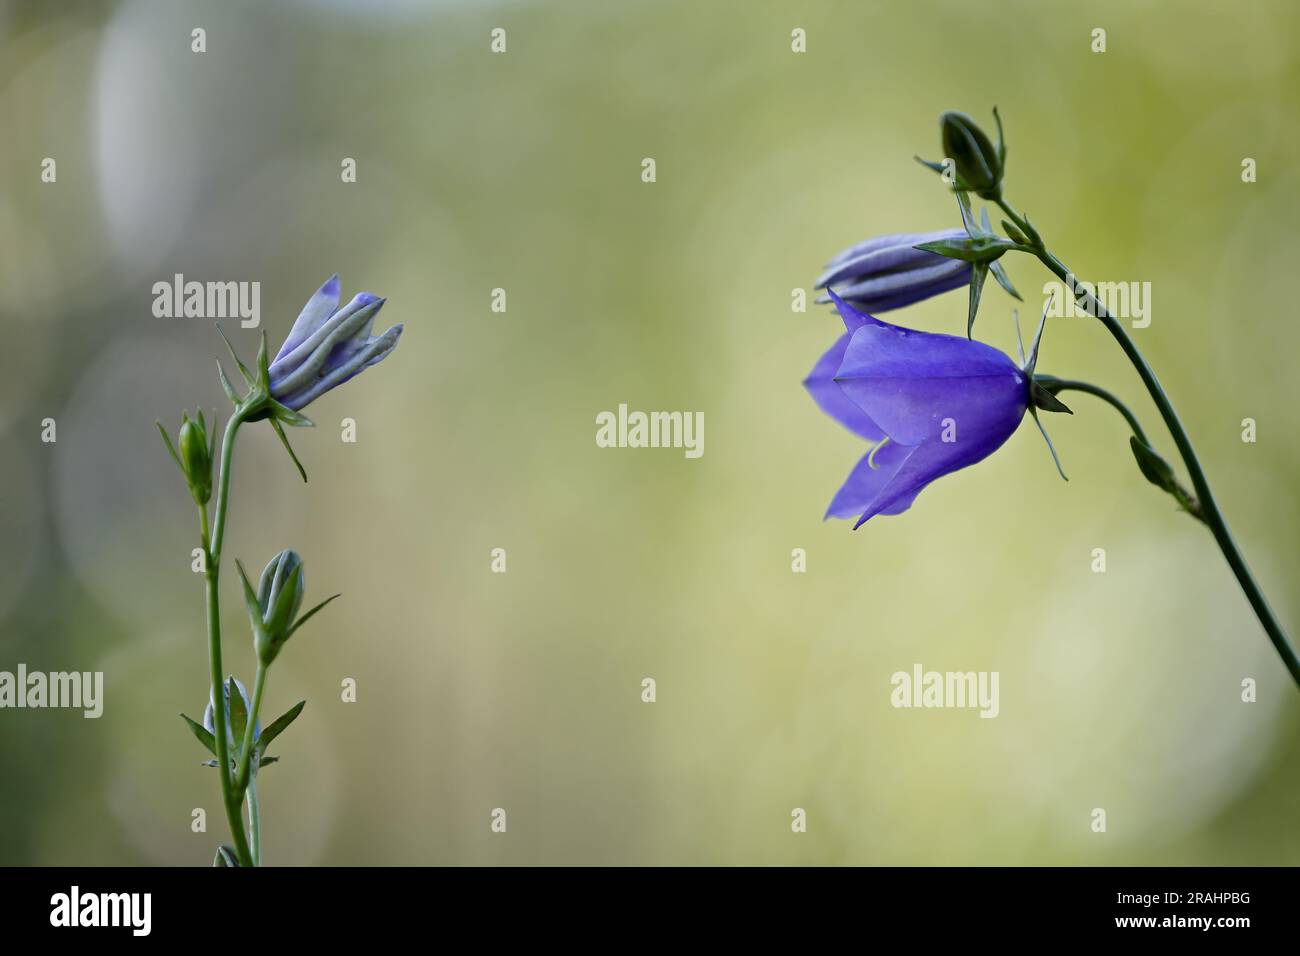 Two peach-leaved bellflower , Campanula persicifolia facing each other on light green background Stock Photo